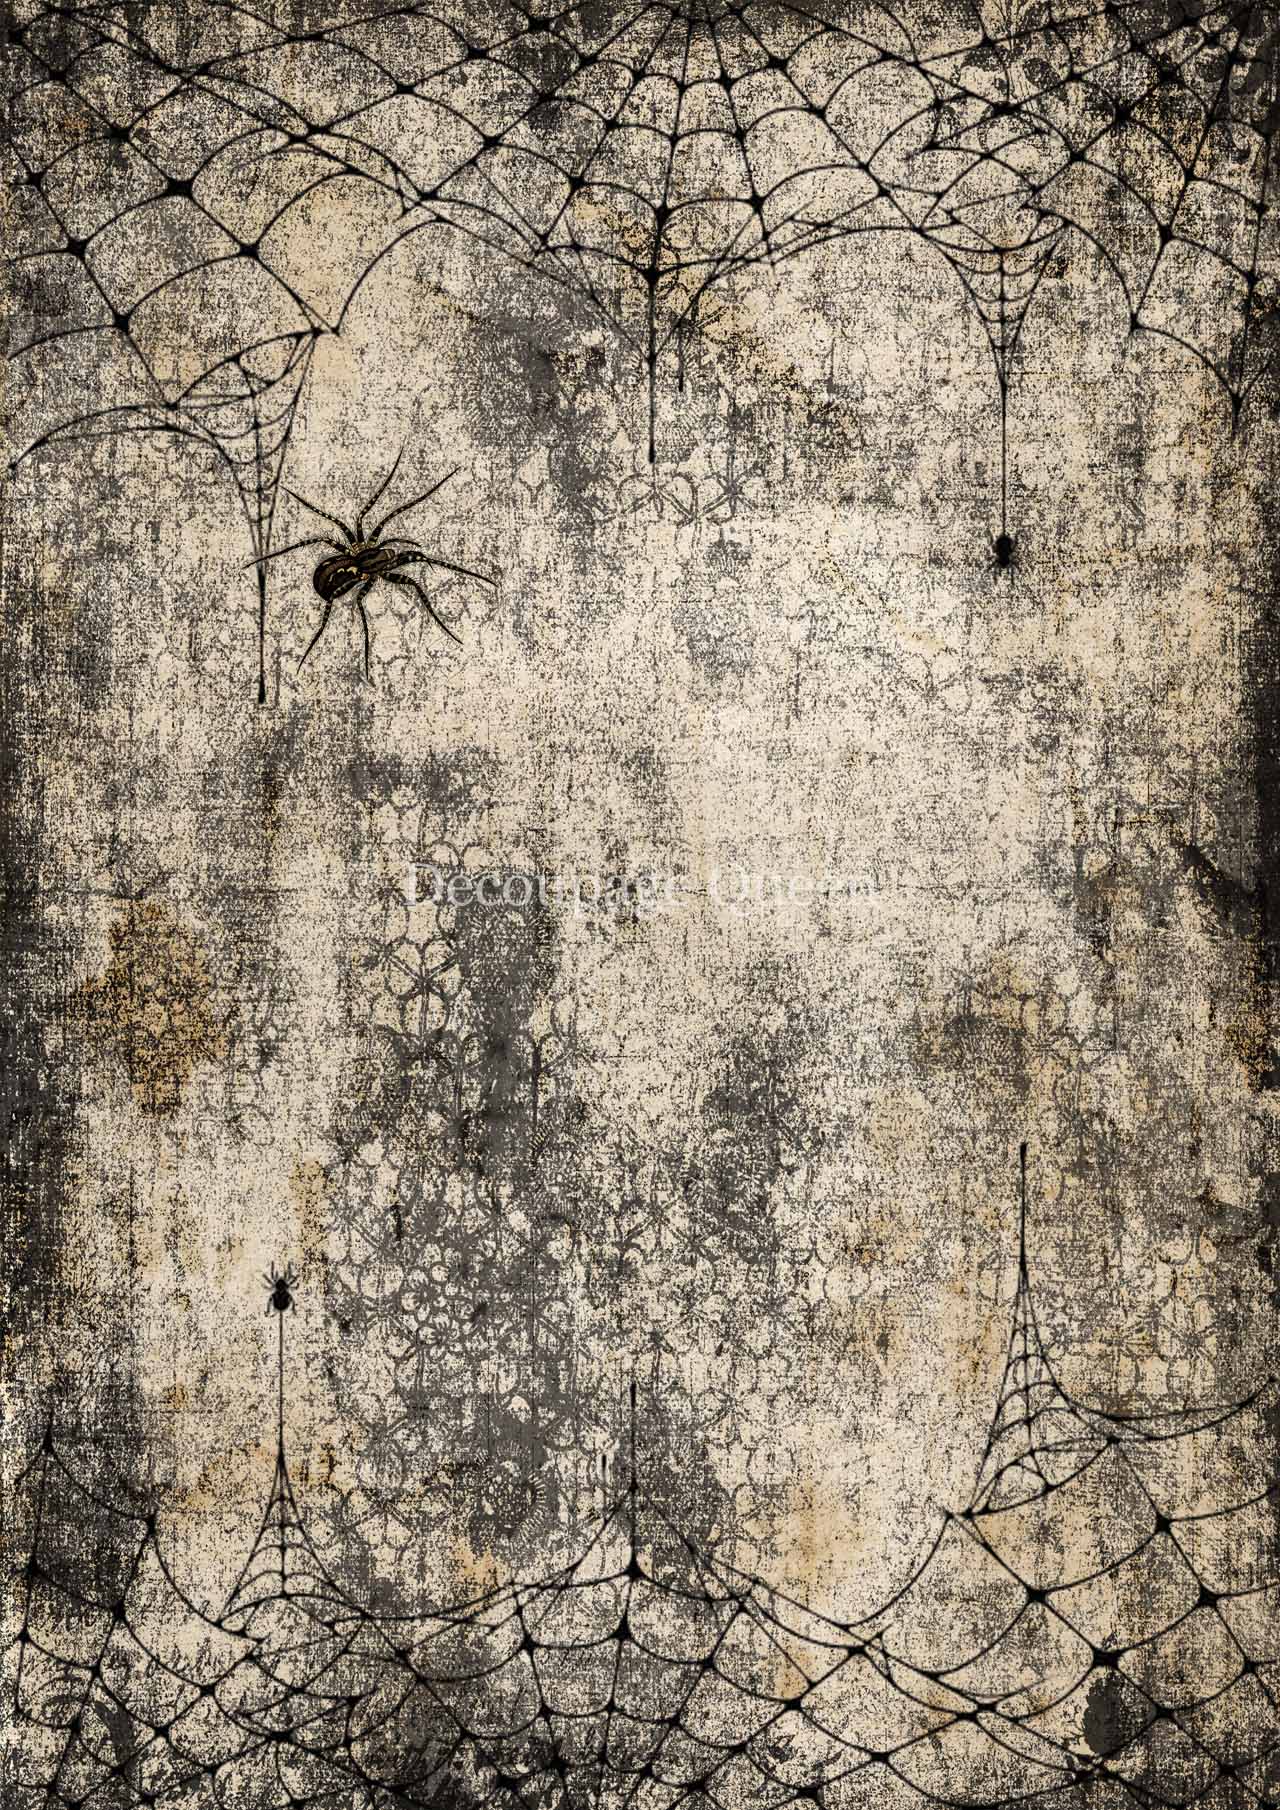 Webs and Spiders Rice Paper A4